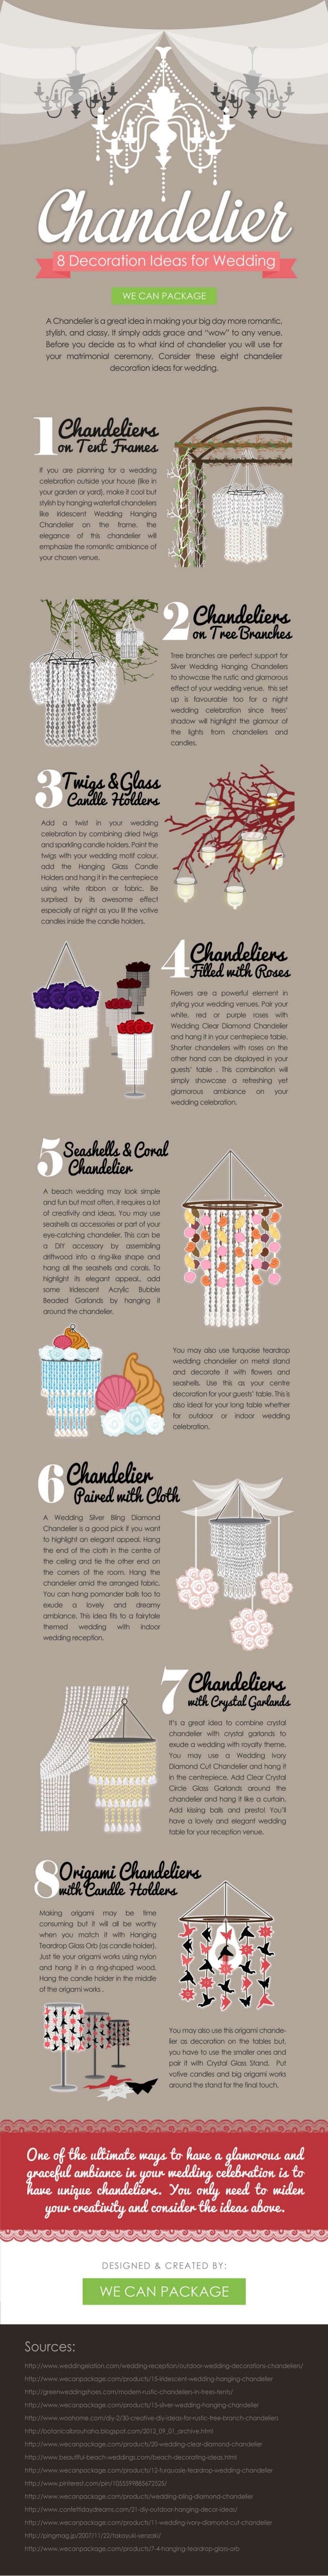 8 Chandelier Decoration Ideas for Wedding (Infographic)